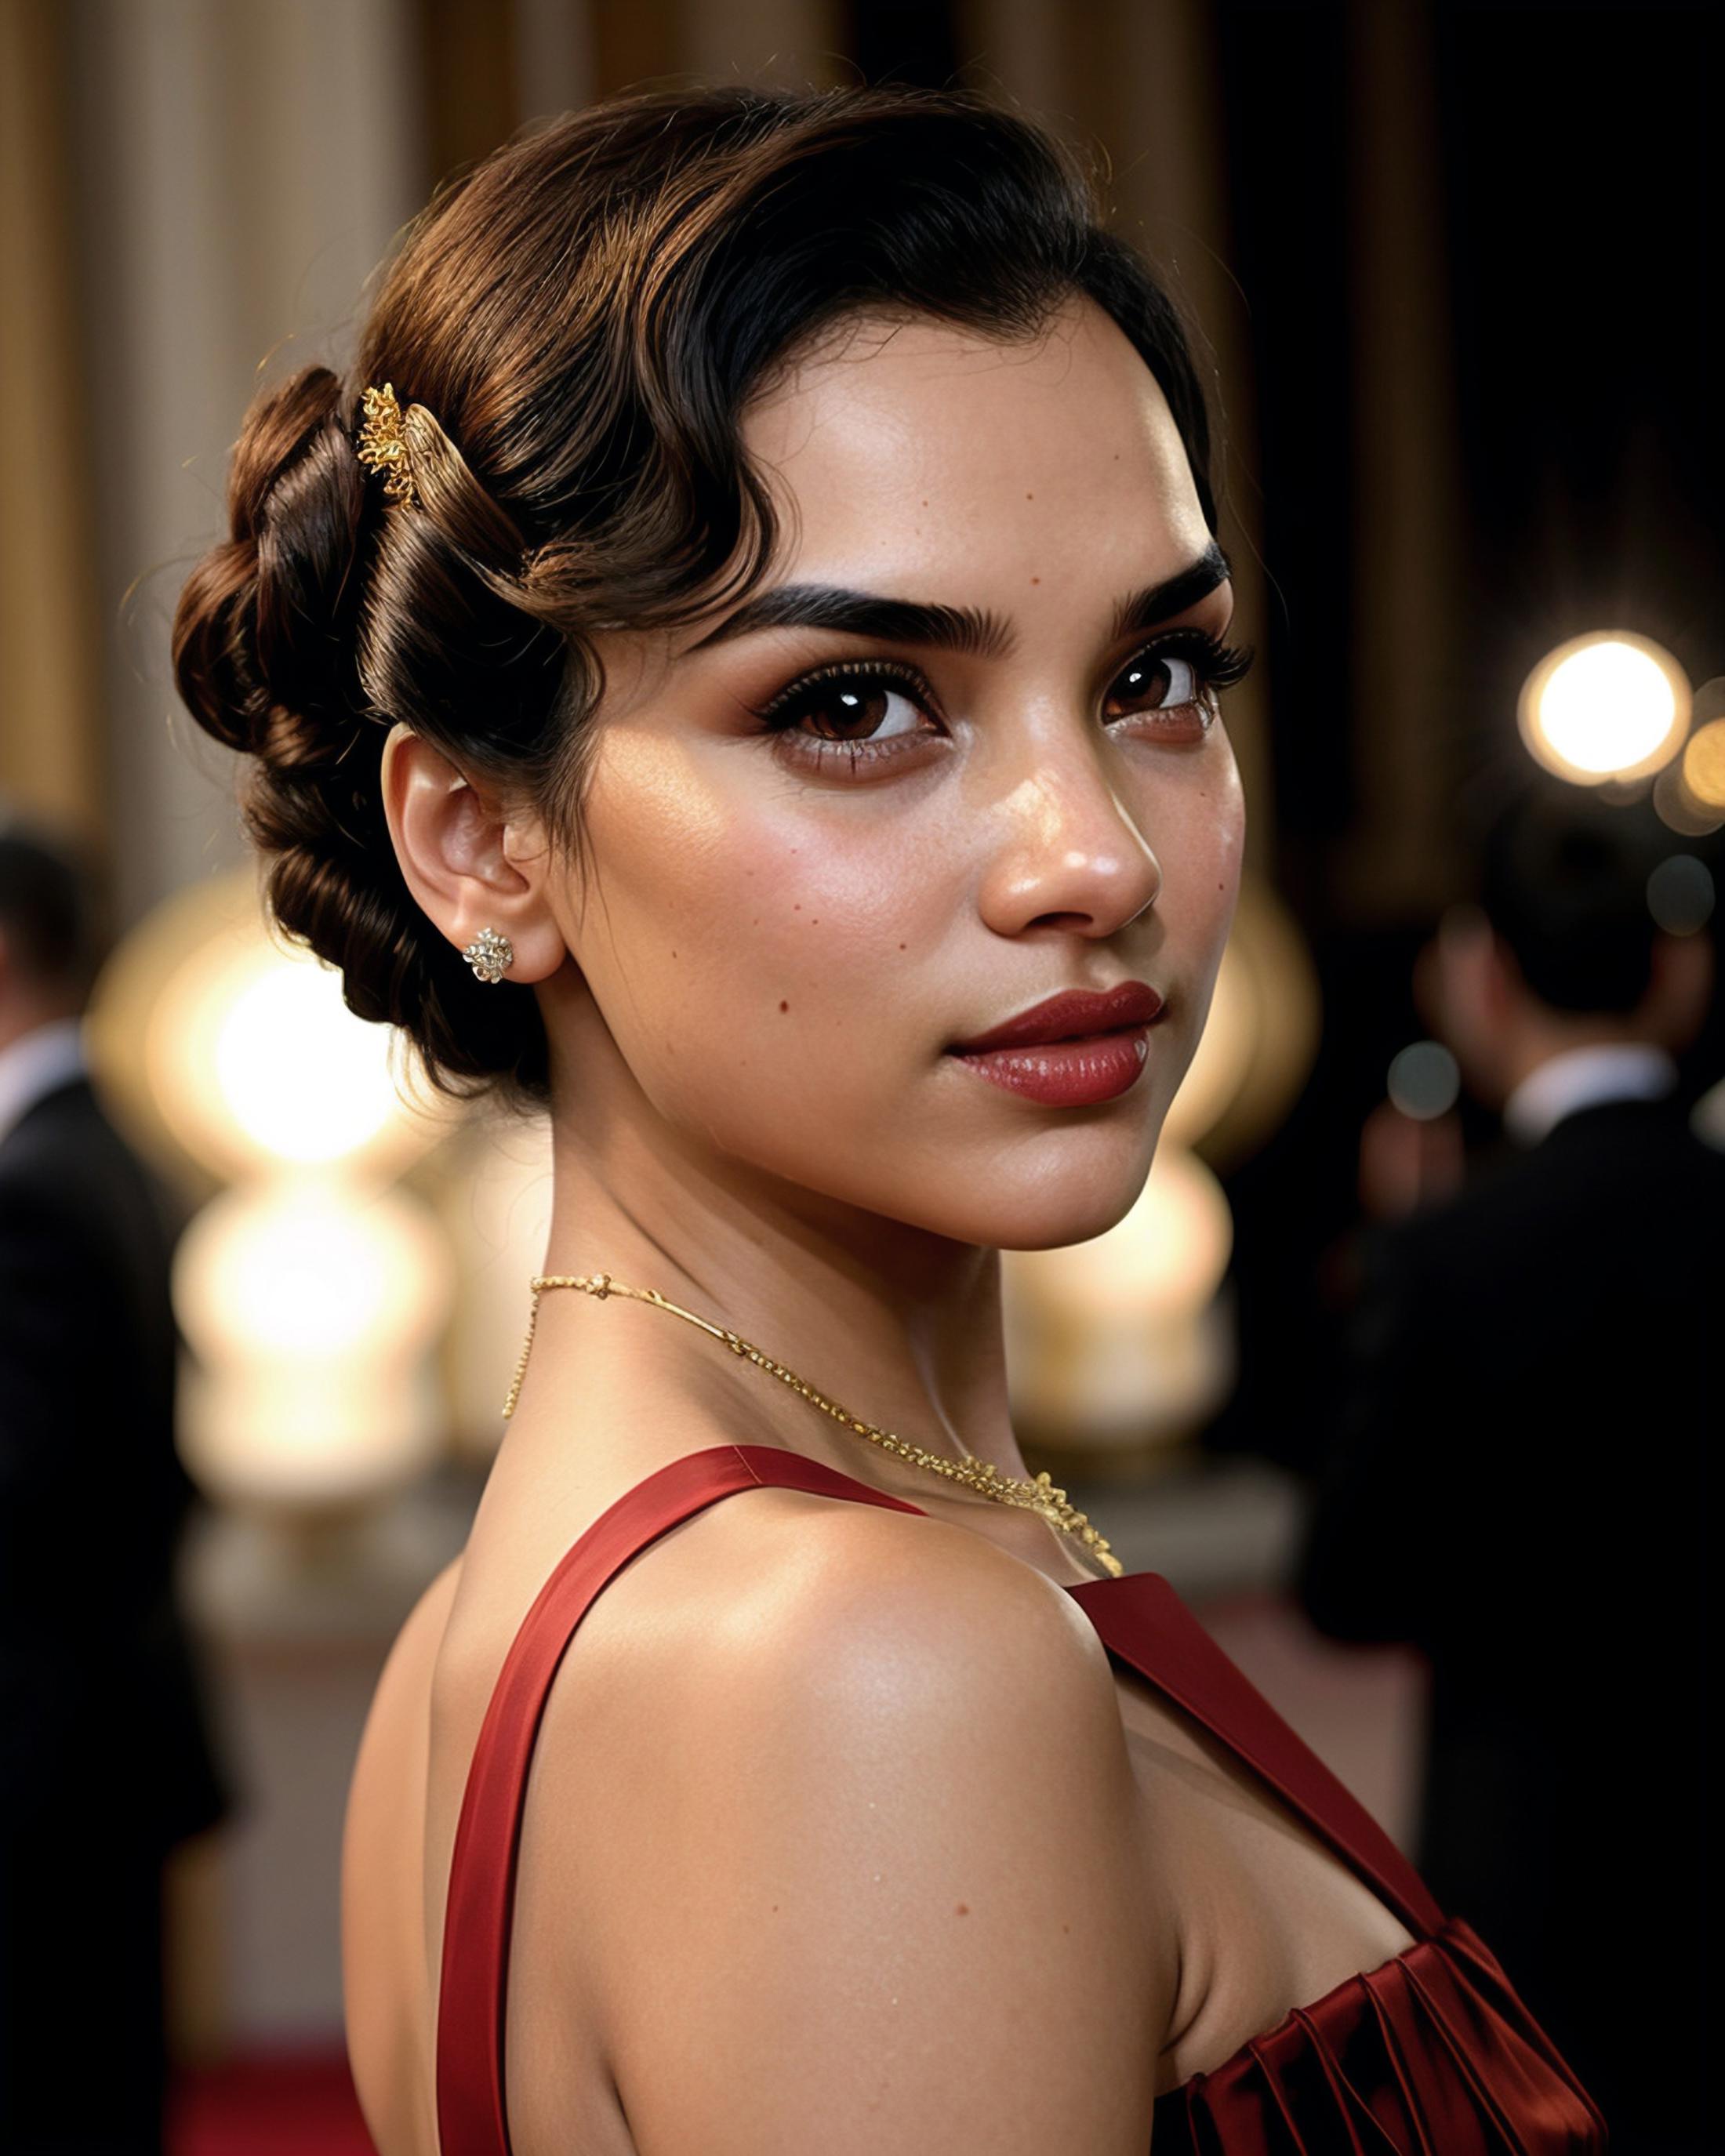 Amber Rose Revah image by chzbro